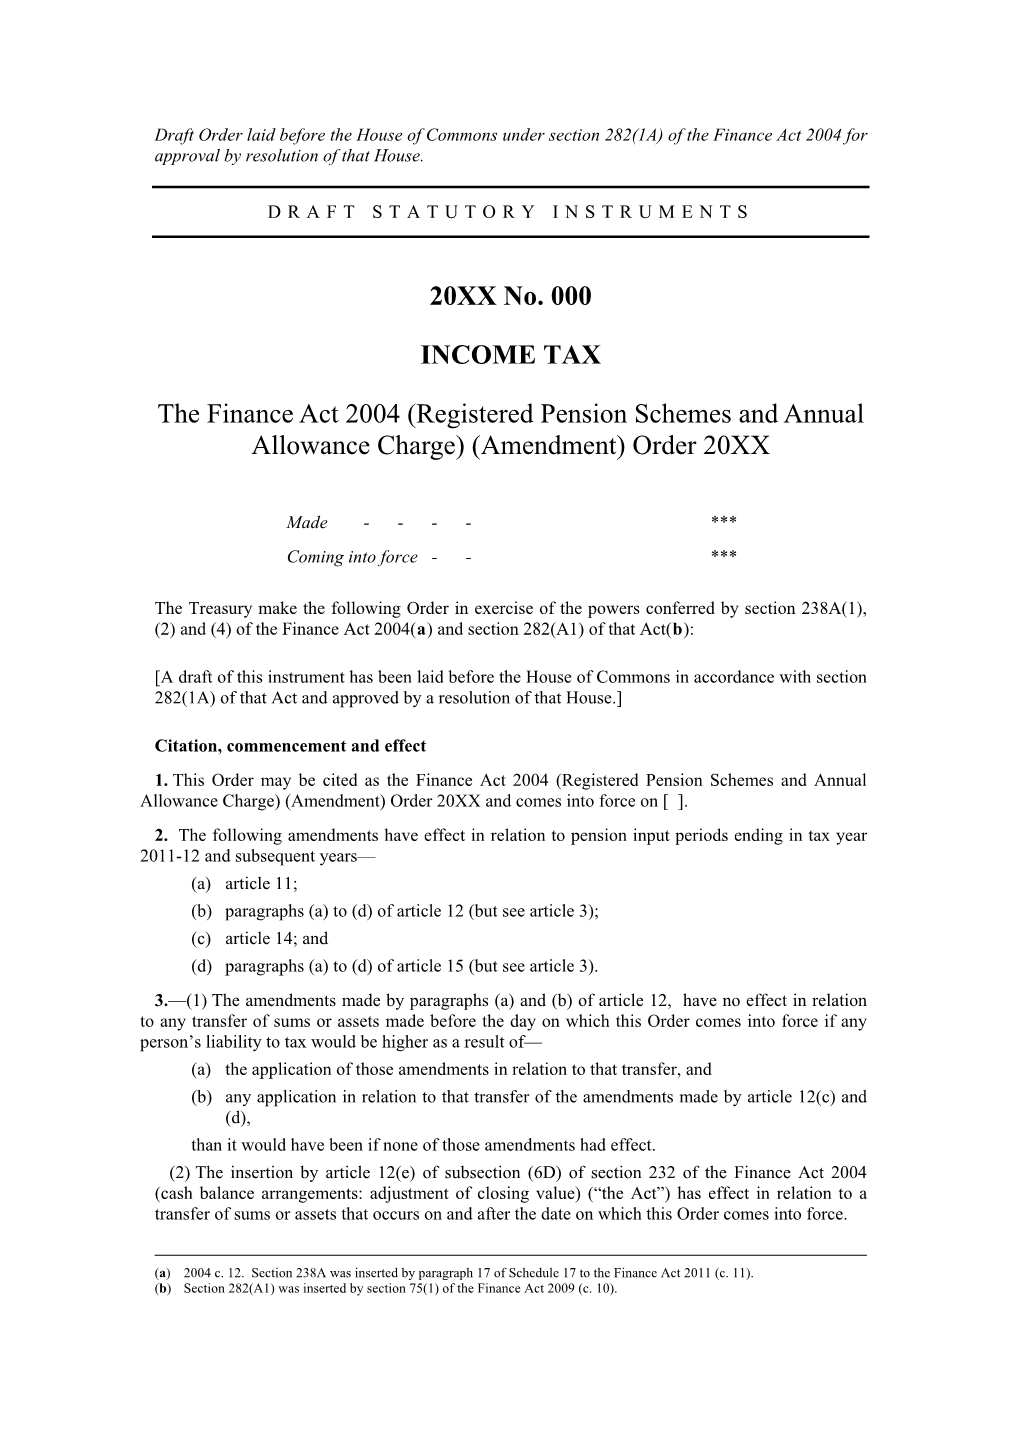 20XX No. 000 INCOME TAX the Finance Act 2004 (Registered Pension Schemes and Annual Allowance Charge)